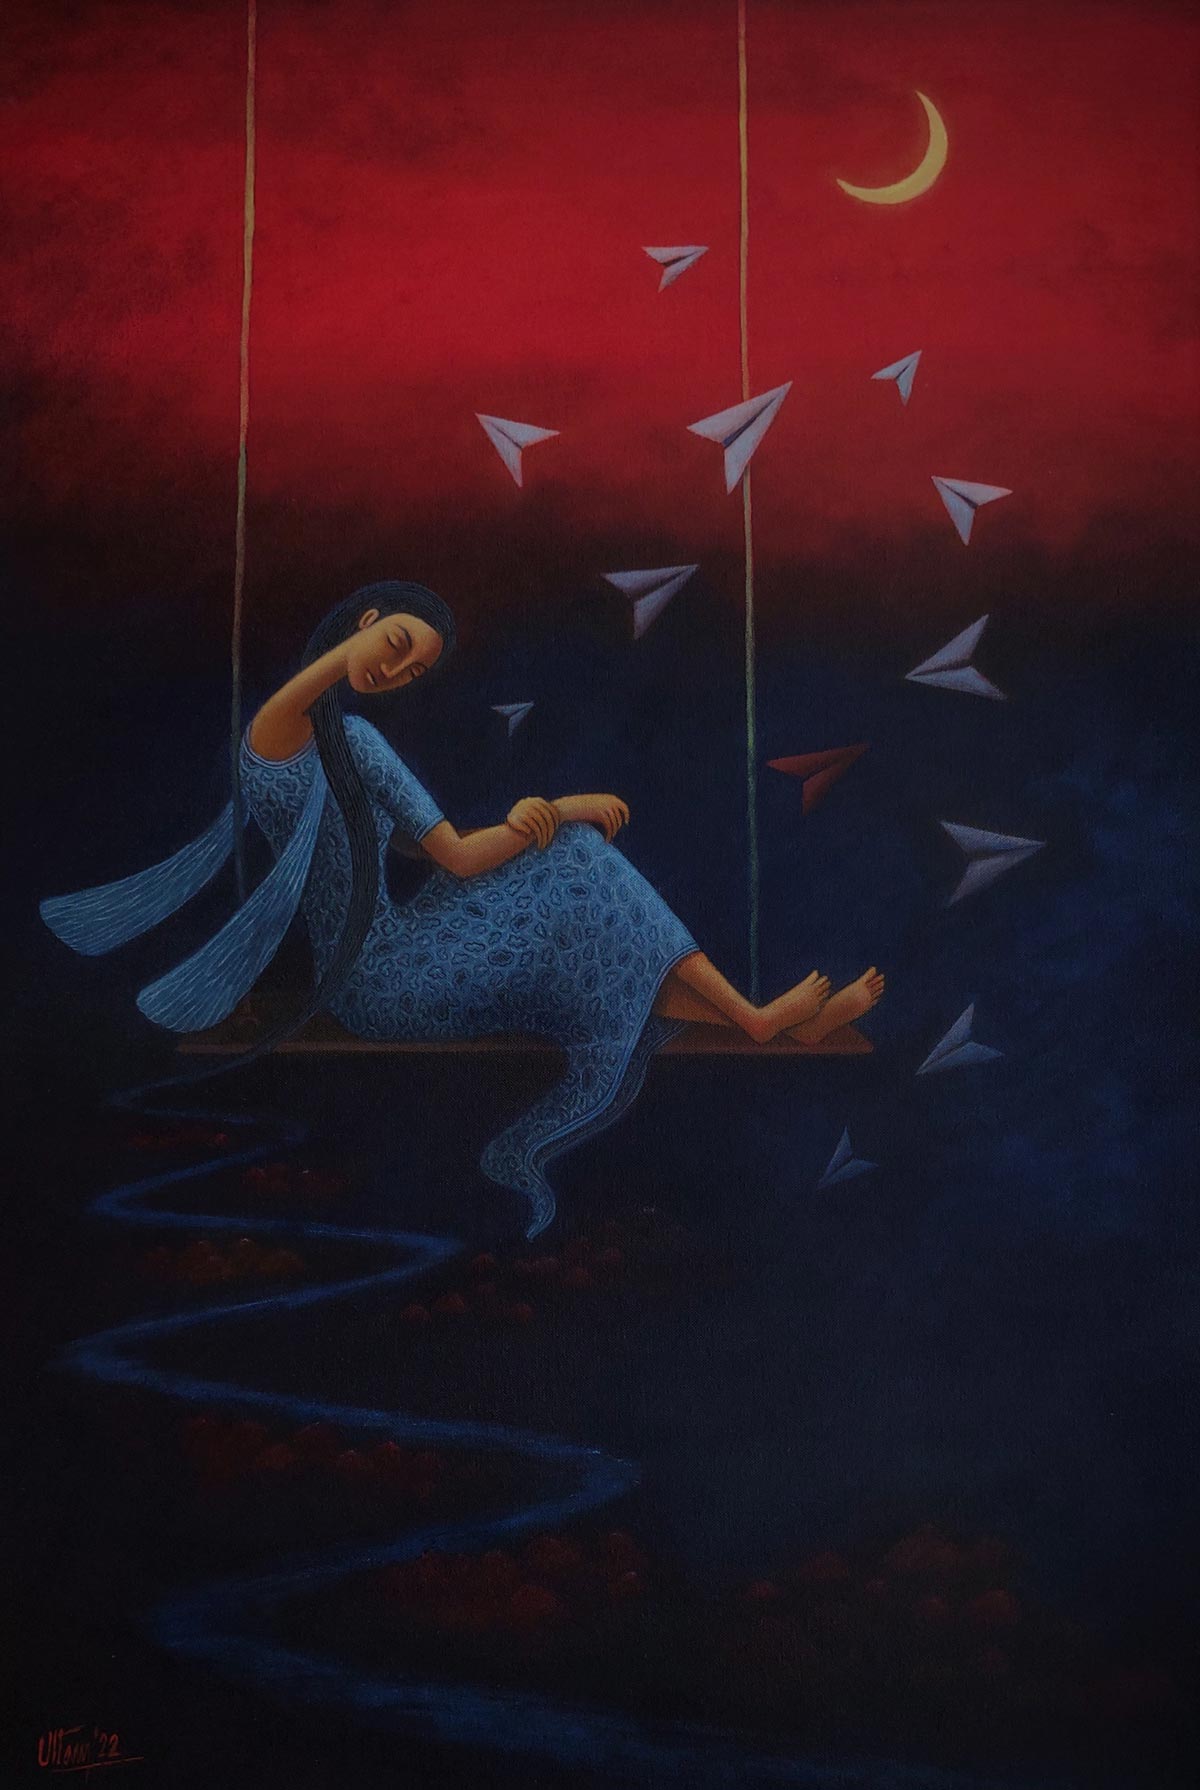 Figurative Painting with Acrylic on Canvas "Flying Dreams" art by Uttam Bhattacharya